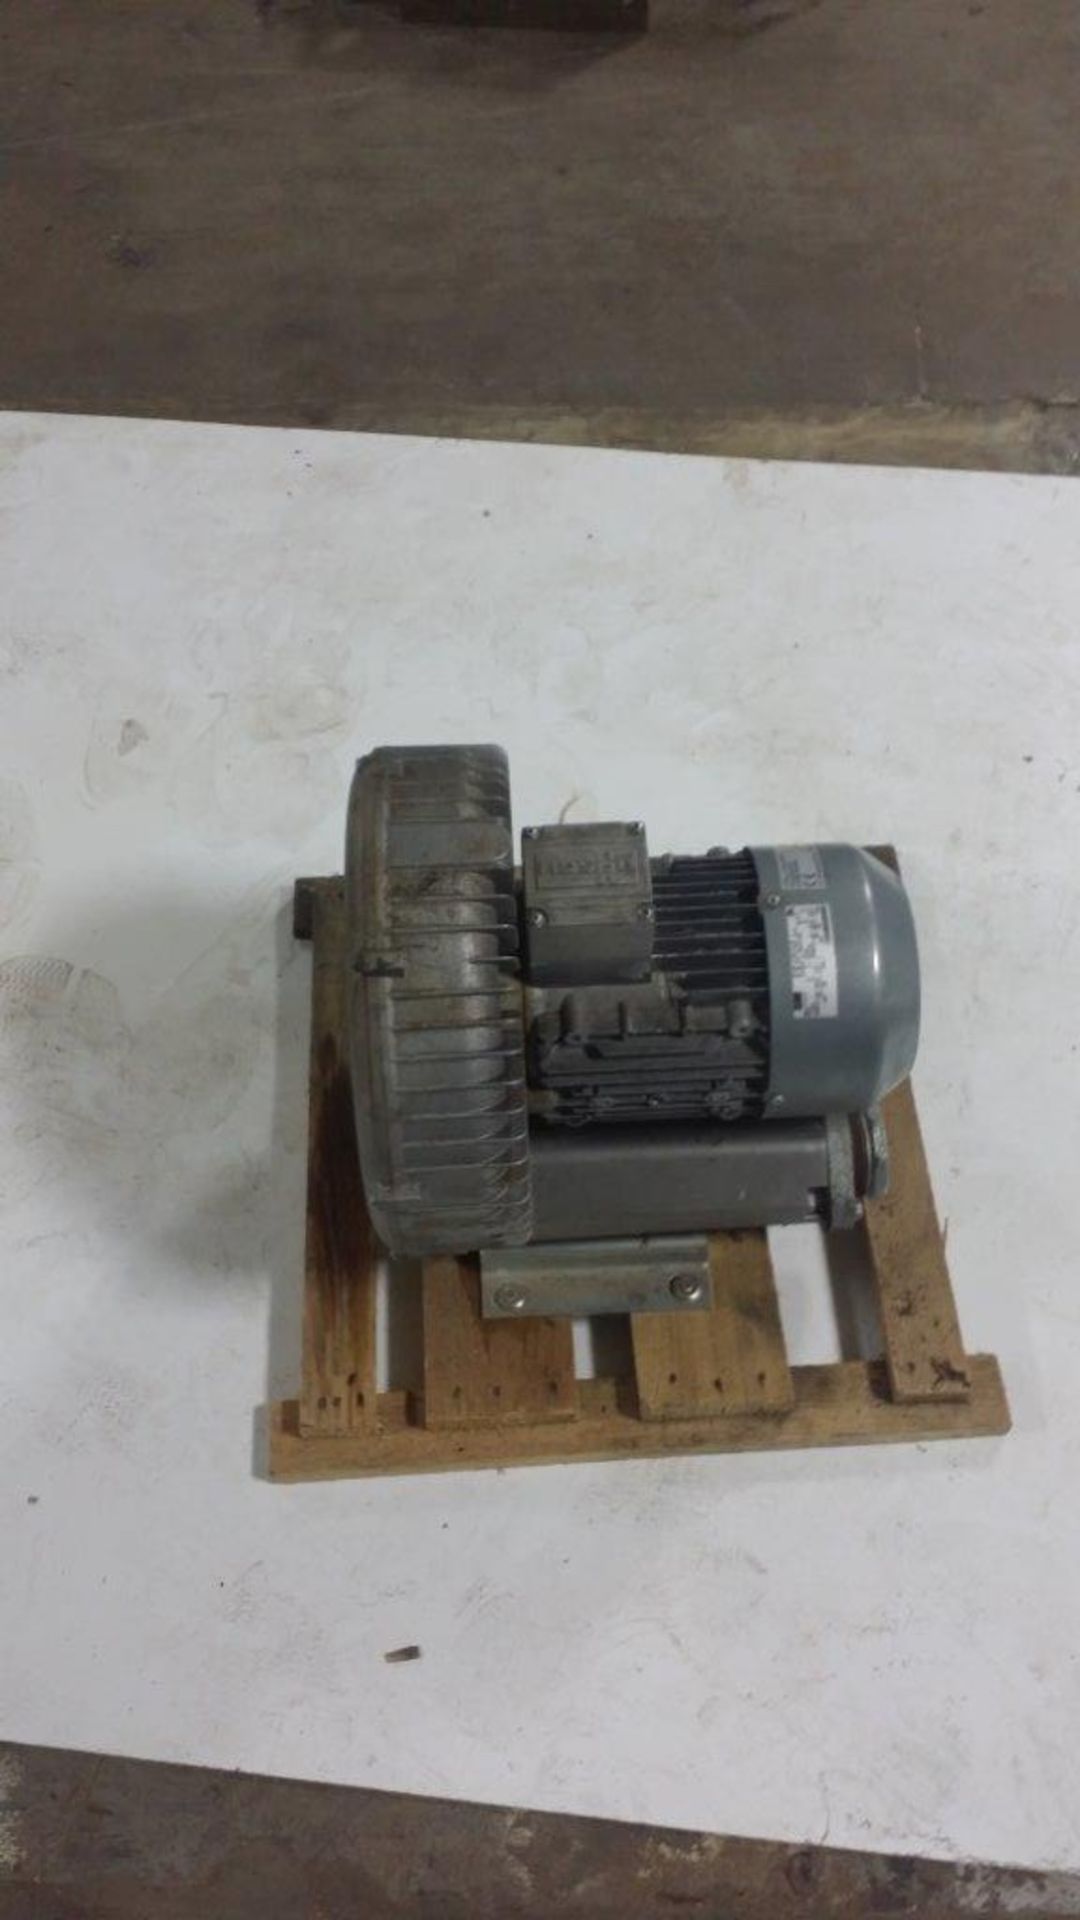 Busch Vacuum Pump, Samos Model SB 0200, smaller models of the Samos SB D0 series. These single-stage